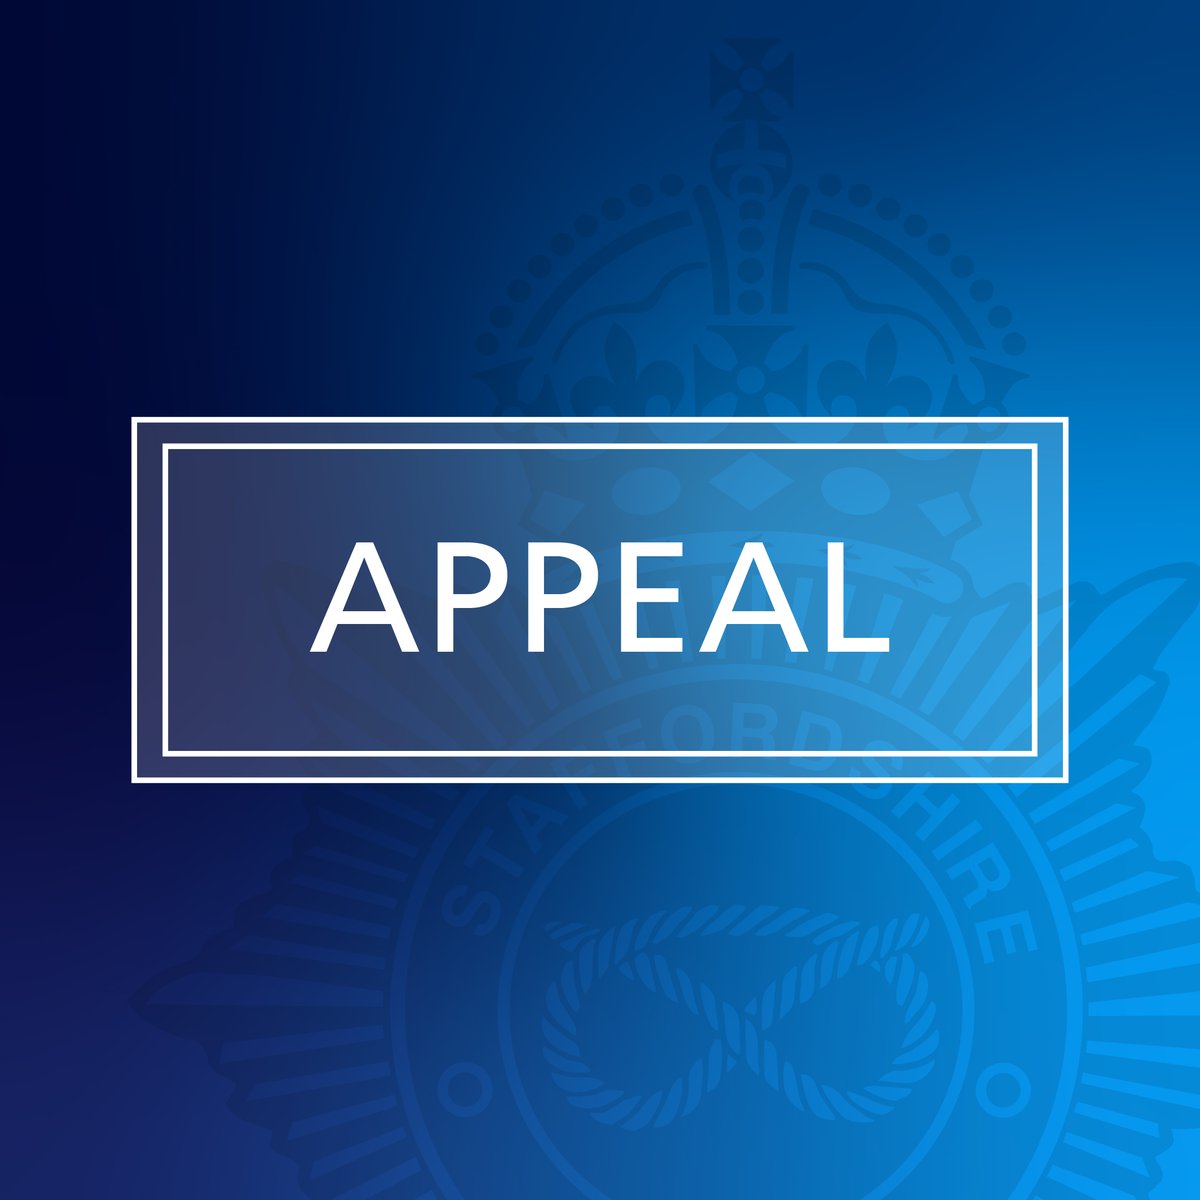 We are appealing for information after a woman was attacked by a dog in Rugeley. It happened at around 8.20am on Friday 29 March on Hednesford Road. The dog bit the head and arm of the woman, who is in her 50s. Read more: orlo.uk/X2cC5